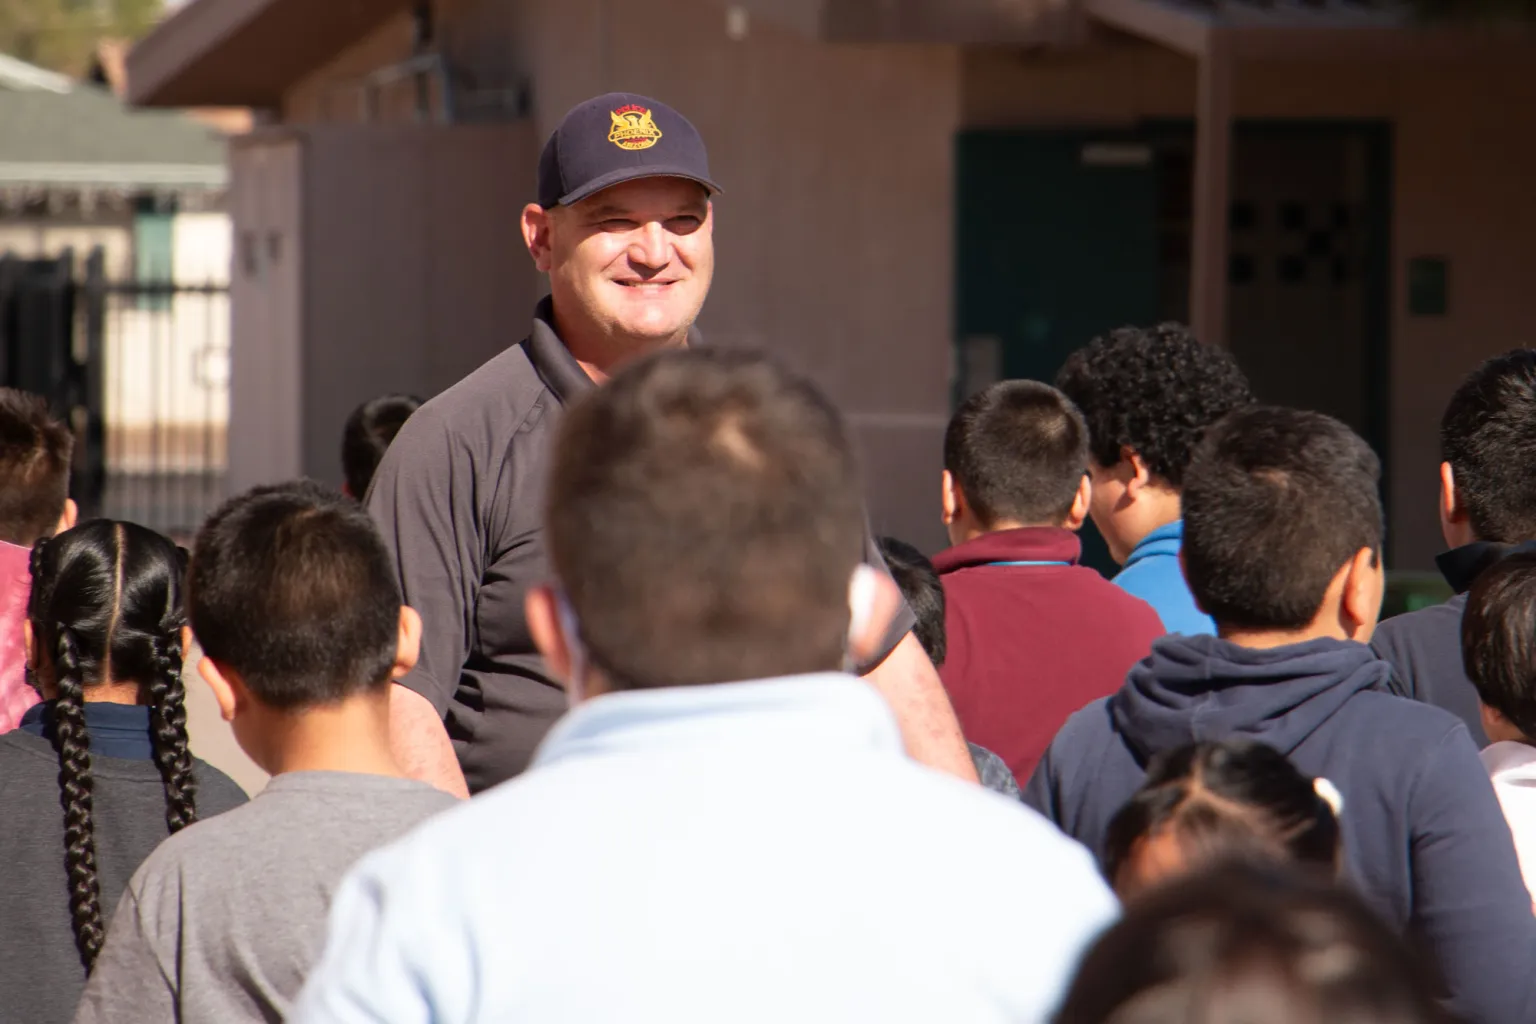 Brian Miller, a school resource officer for Charles W. Harris School in Phoenix, greets children at the school during his shift on Dec. 7, 2023. ©Brendon Derr/AZCIR